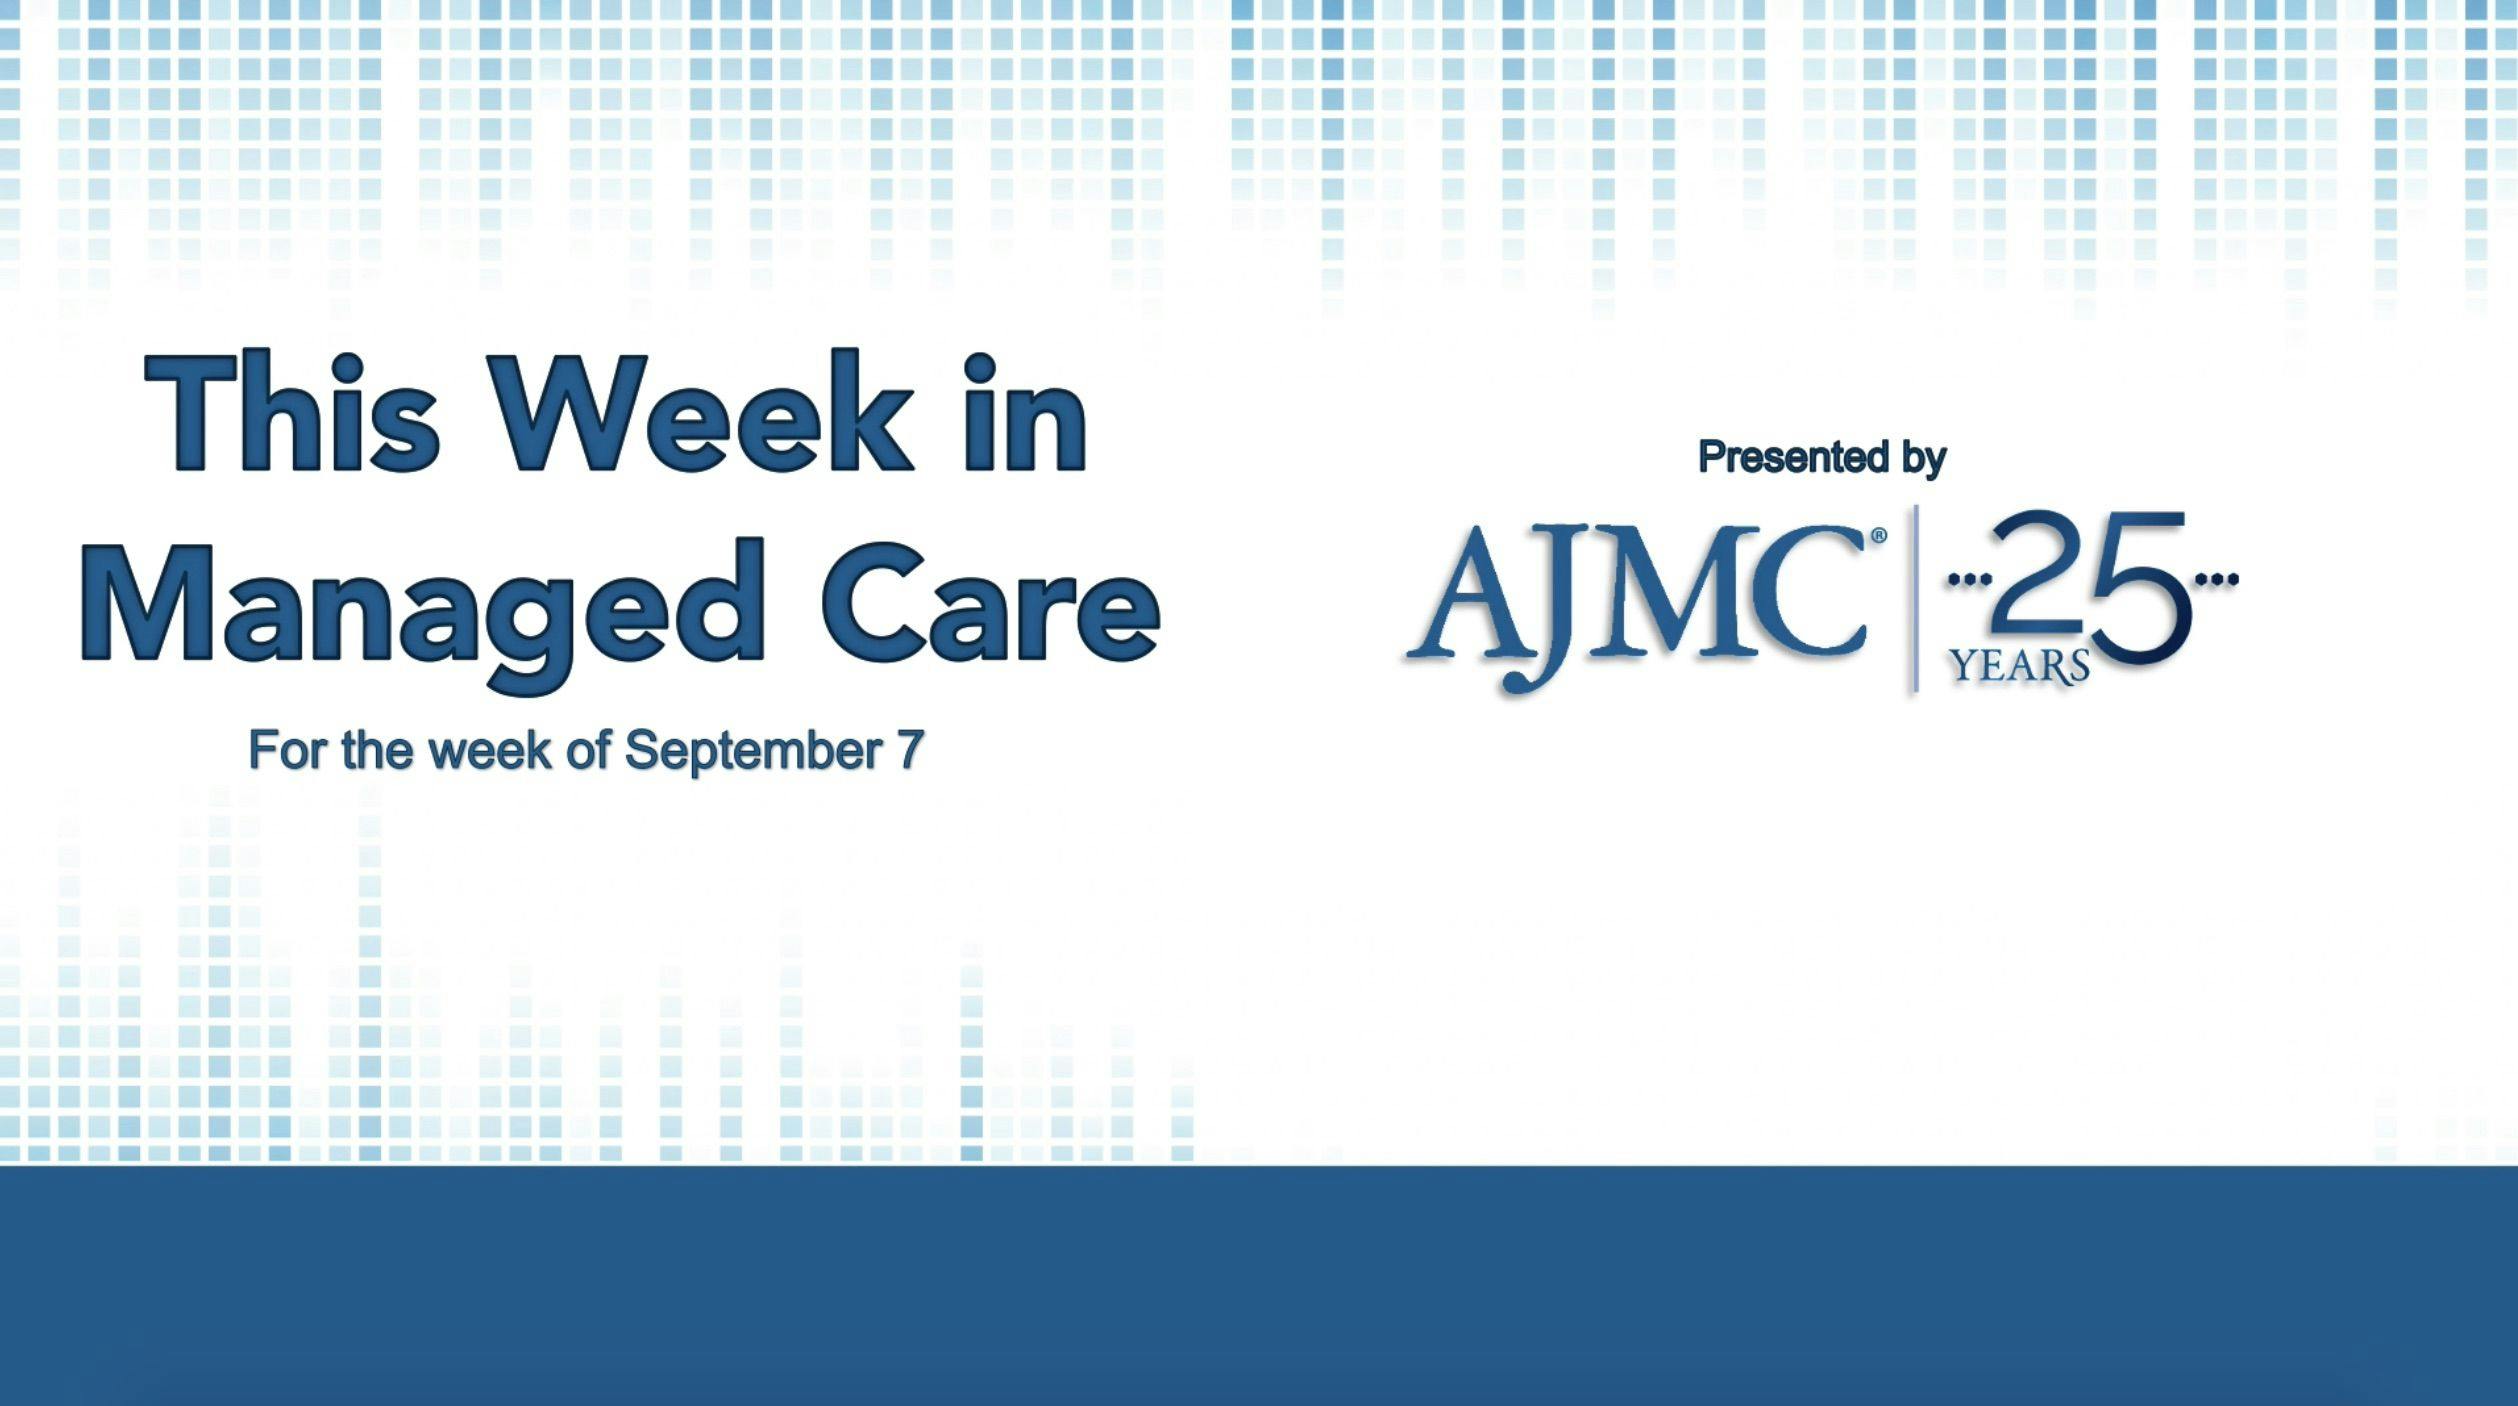 This Week in Managed Care: September 11, 2020